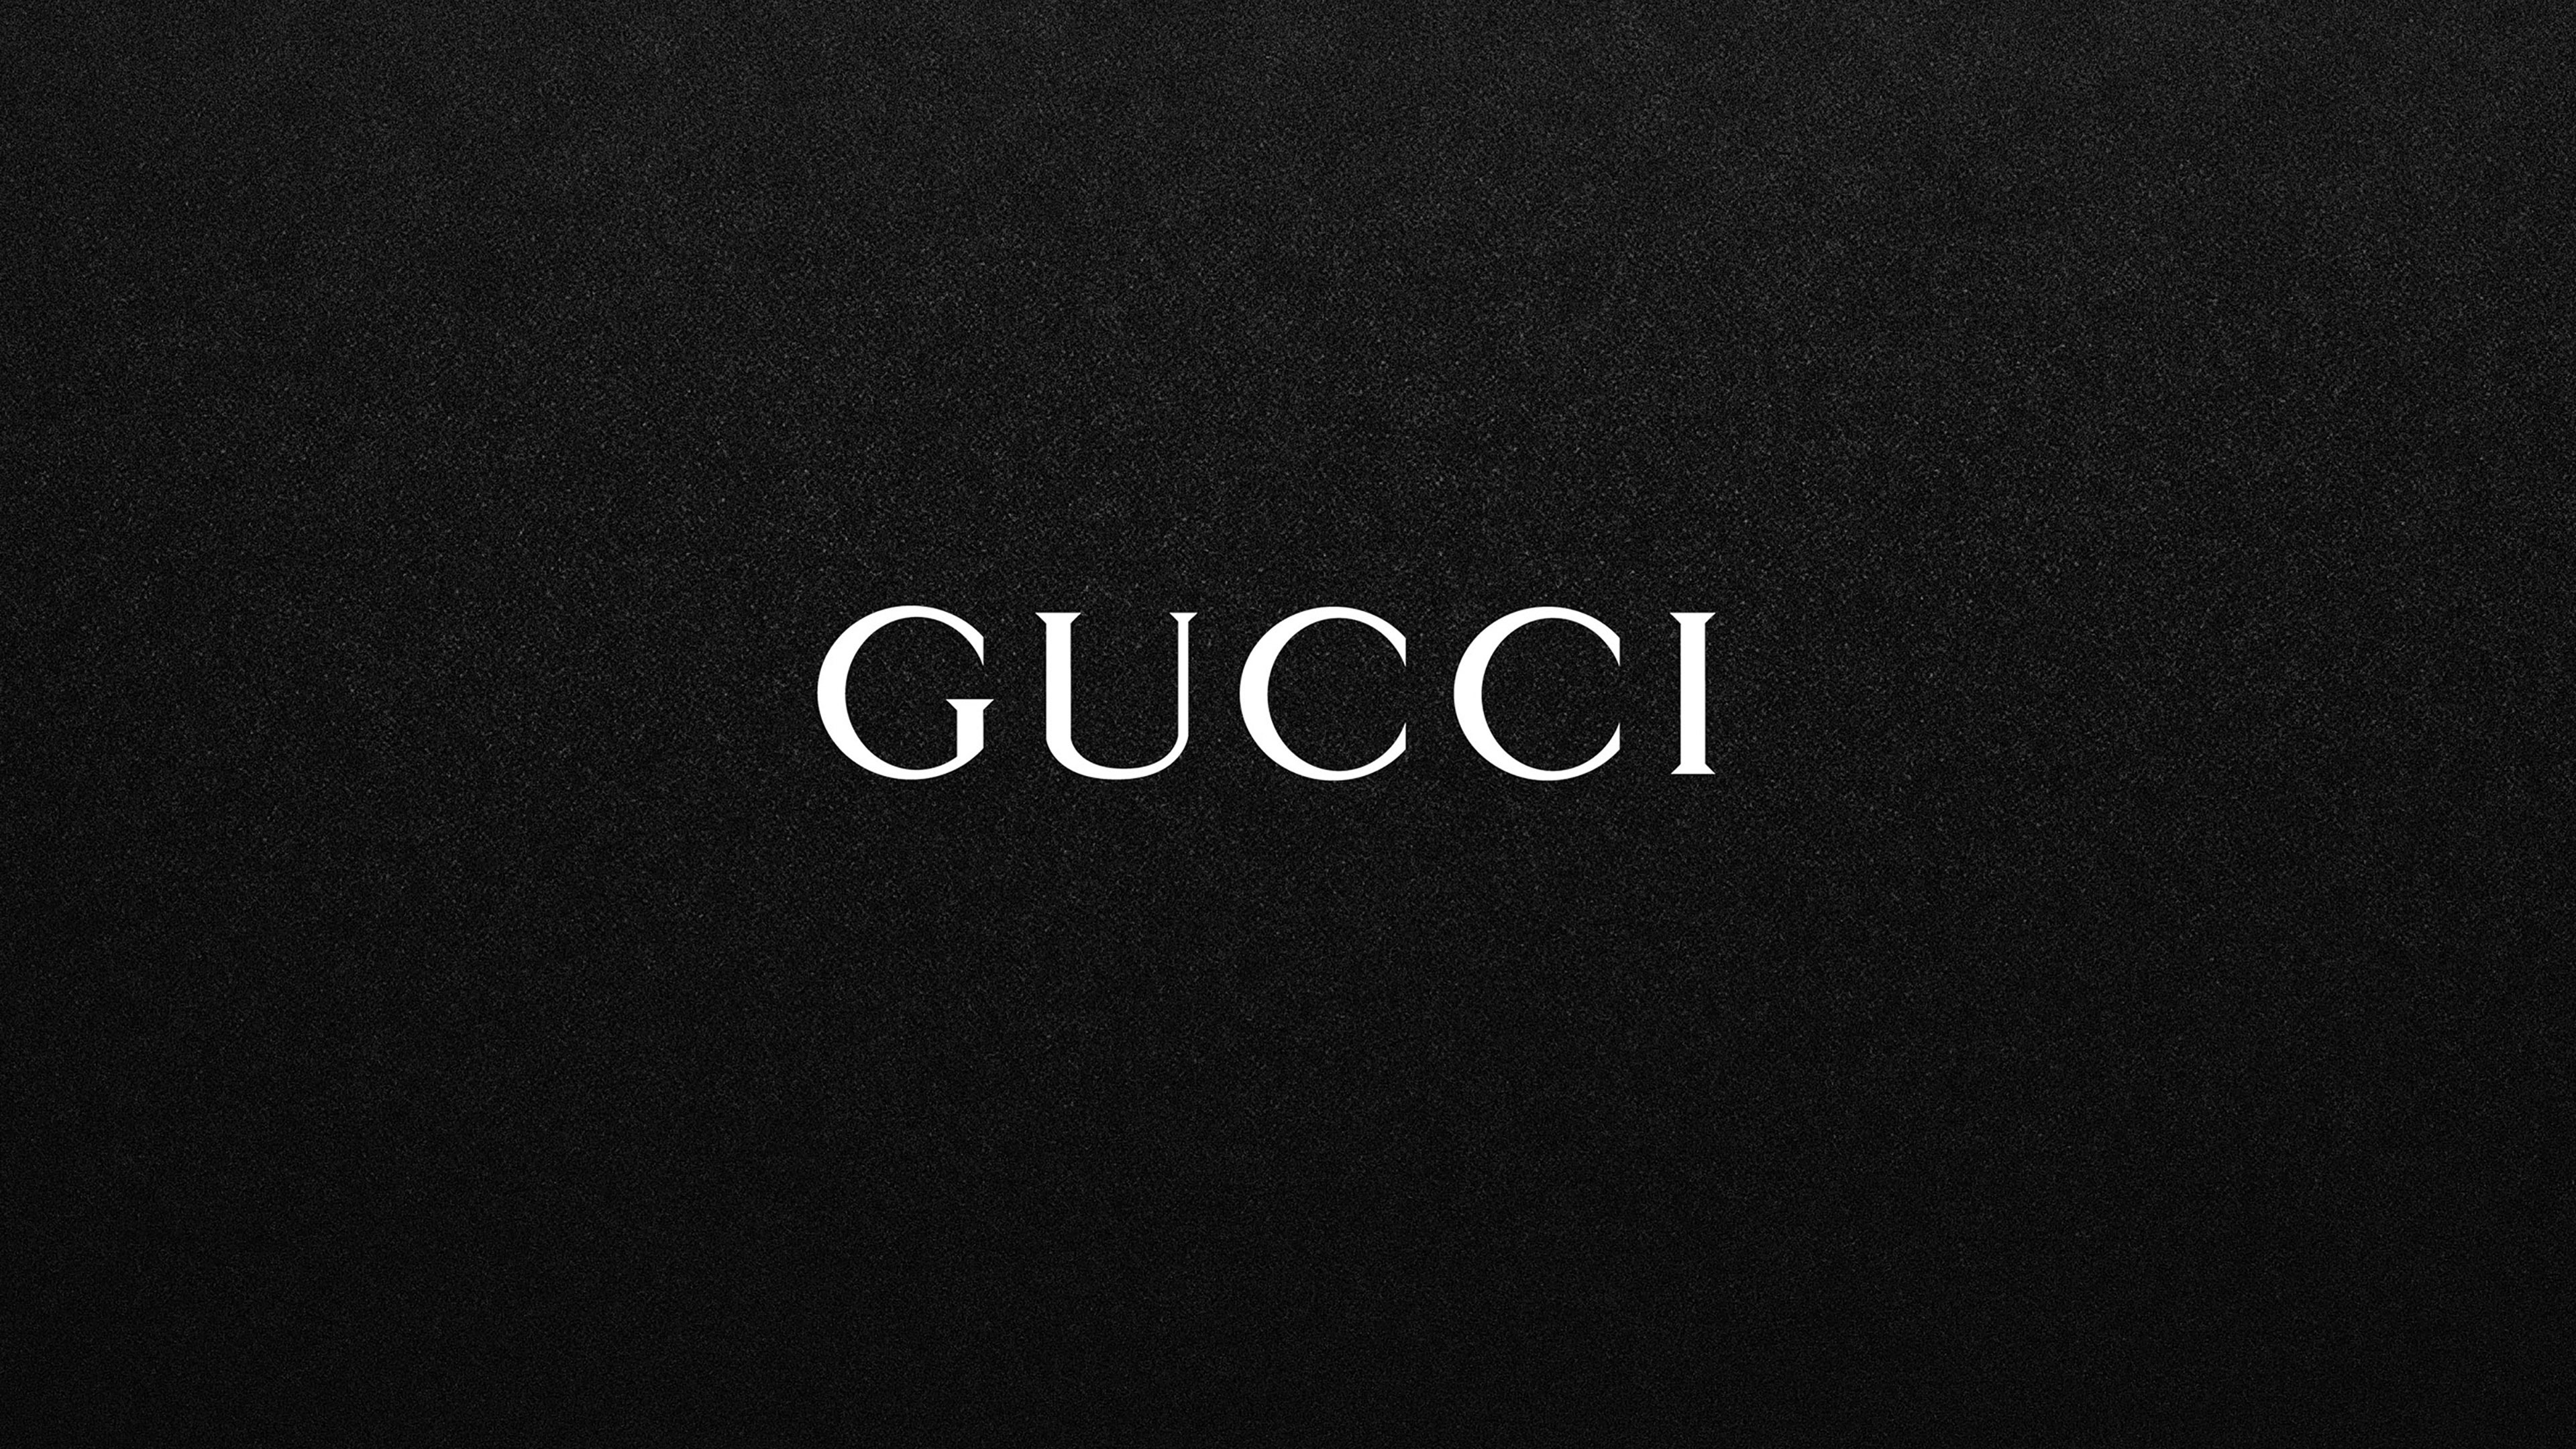 Gucci - Logos, brands and logotypes